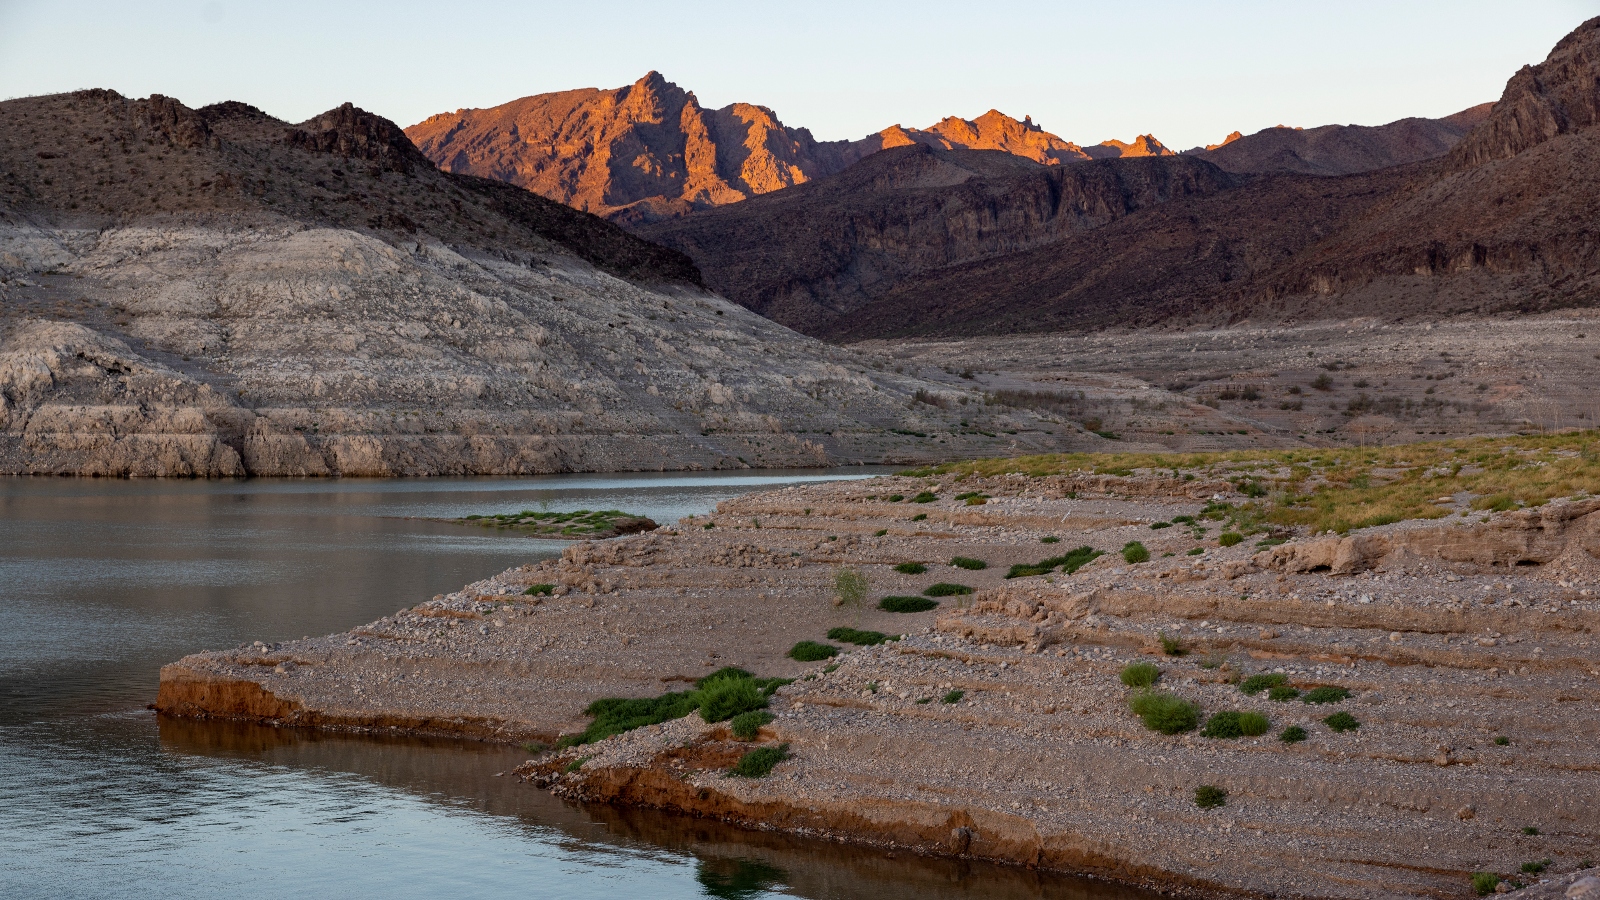 Land that was once under Lake Mead re-emerges as unprecedented drought reduces Colorado River and Lake Mead to critical water levels.